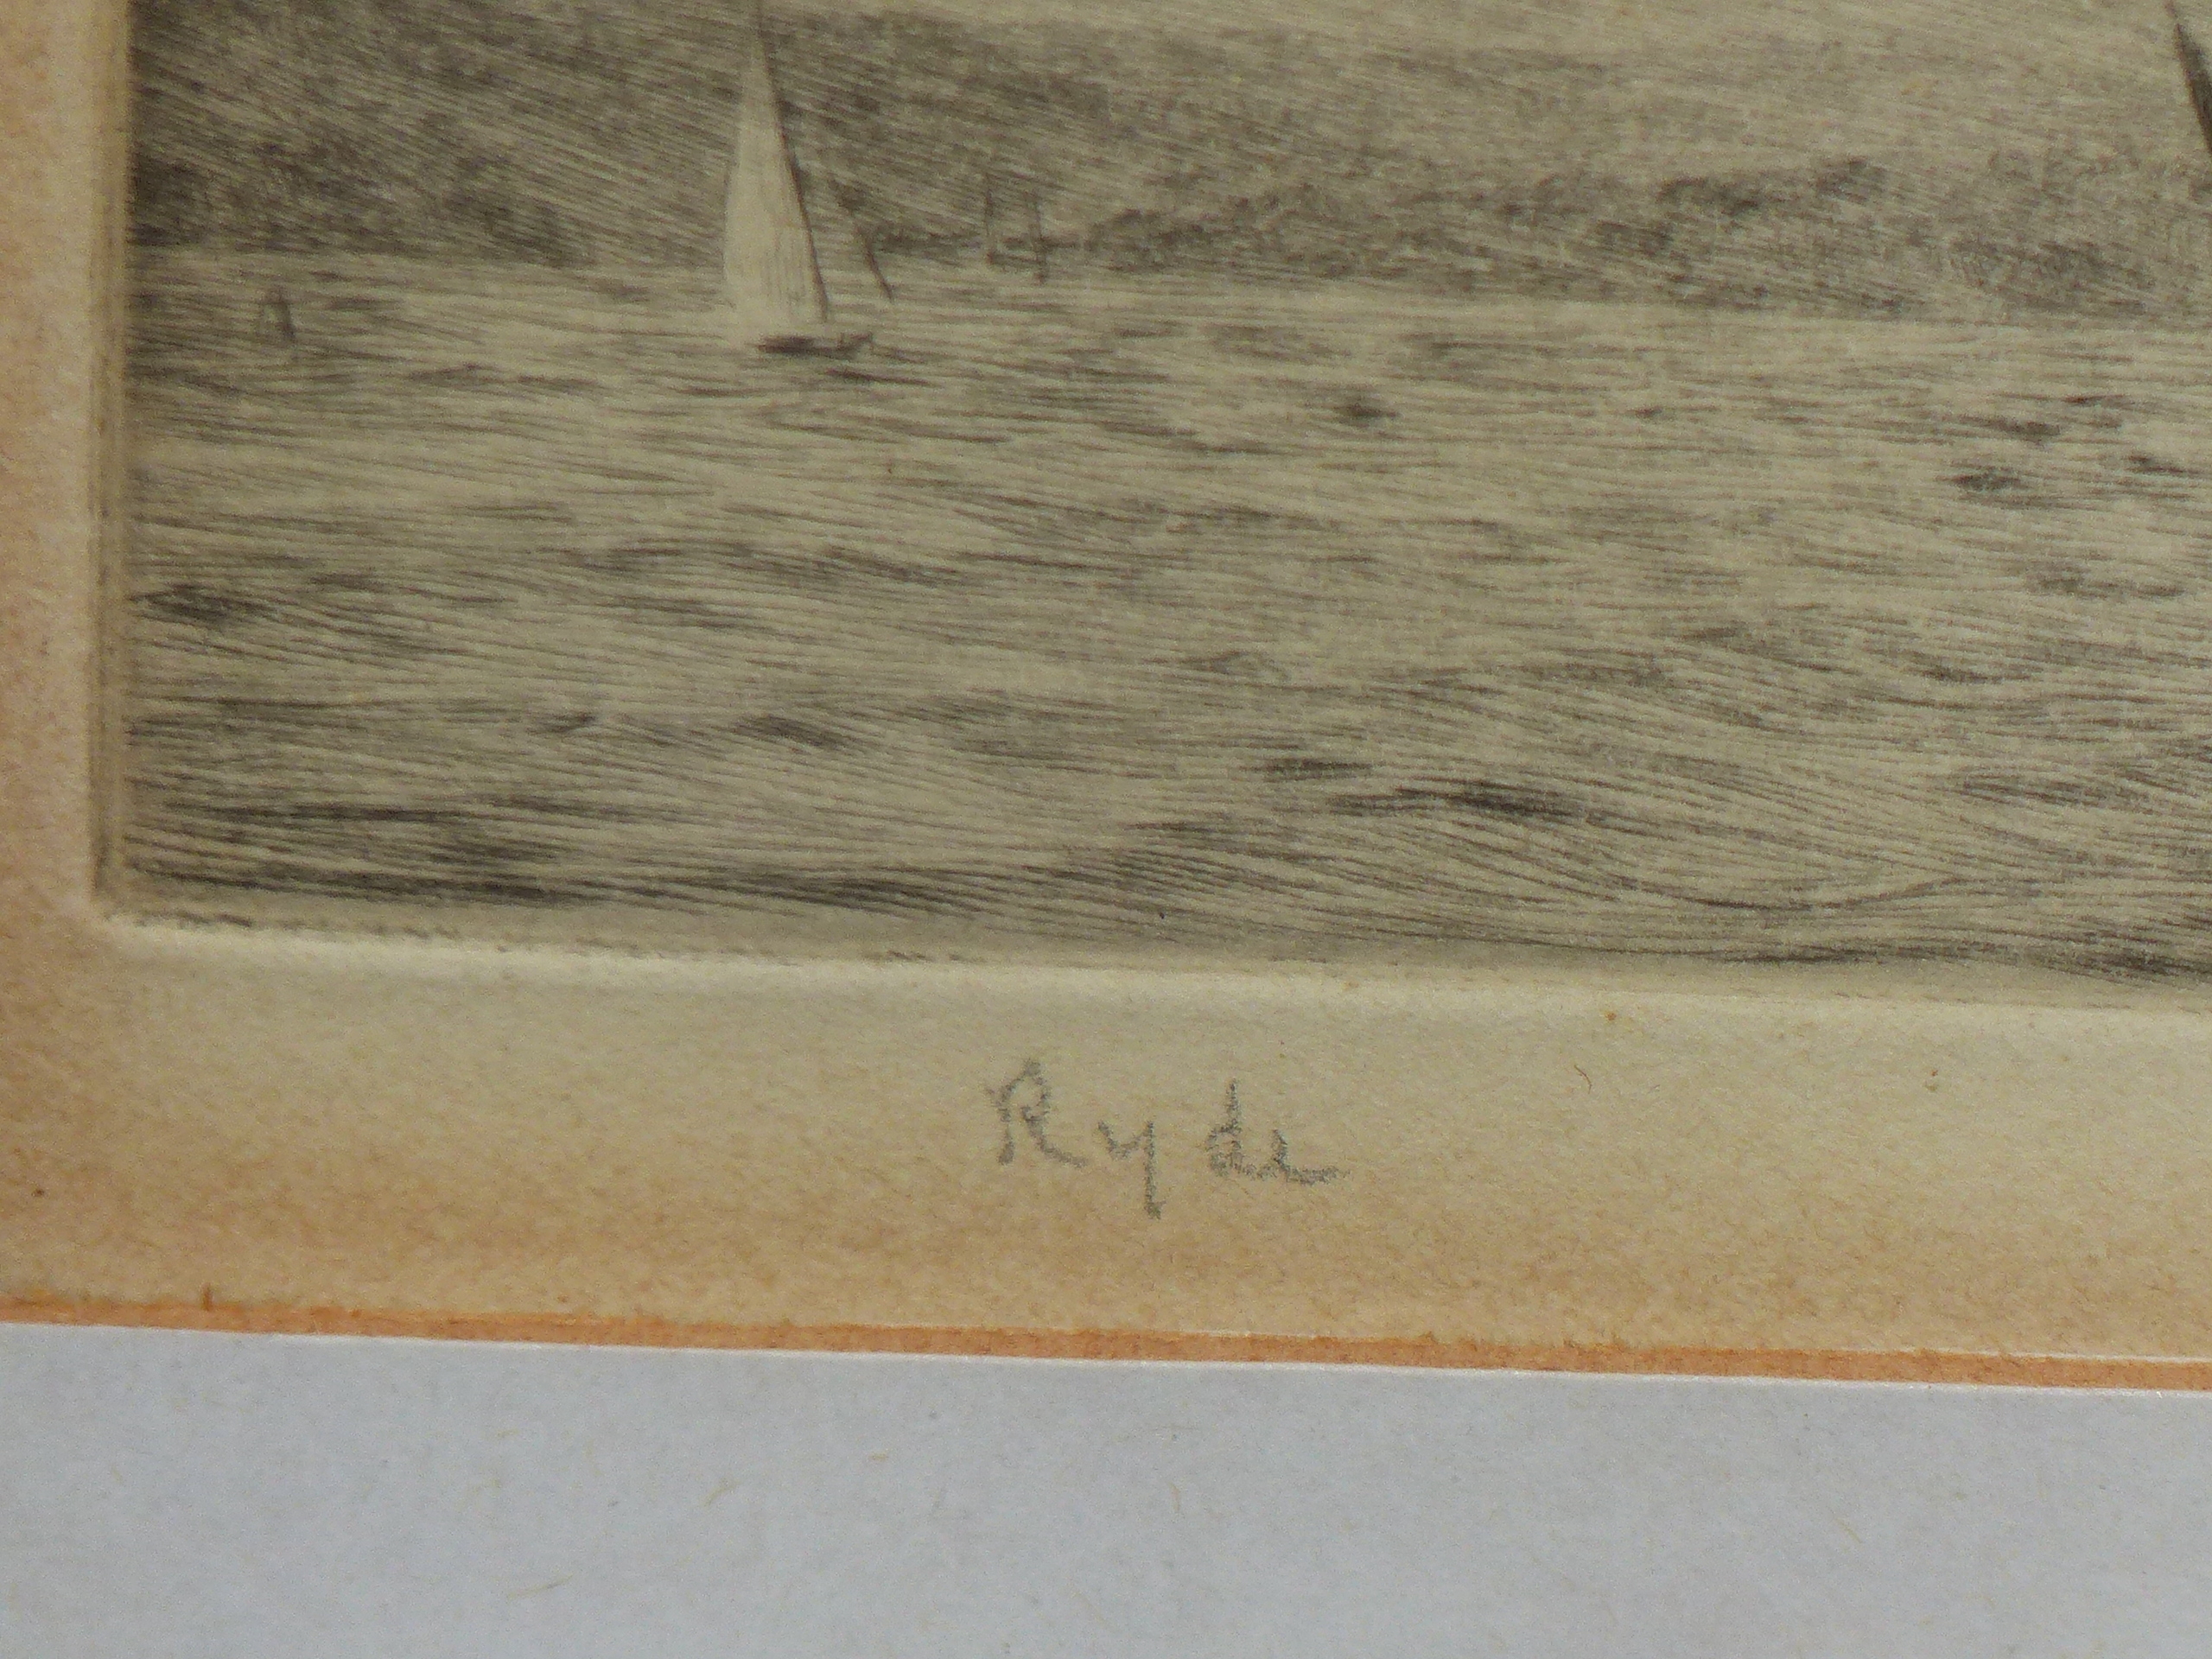 ROWLAND LANGMAID (1897 - 1956). SAILING VESSELS OFF RYDE. PENCIL SIGNED ETCHING. 10 x 34cms. - Image 8 of 9